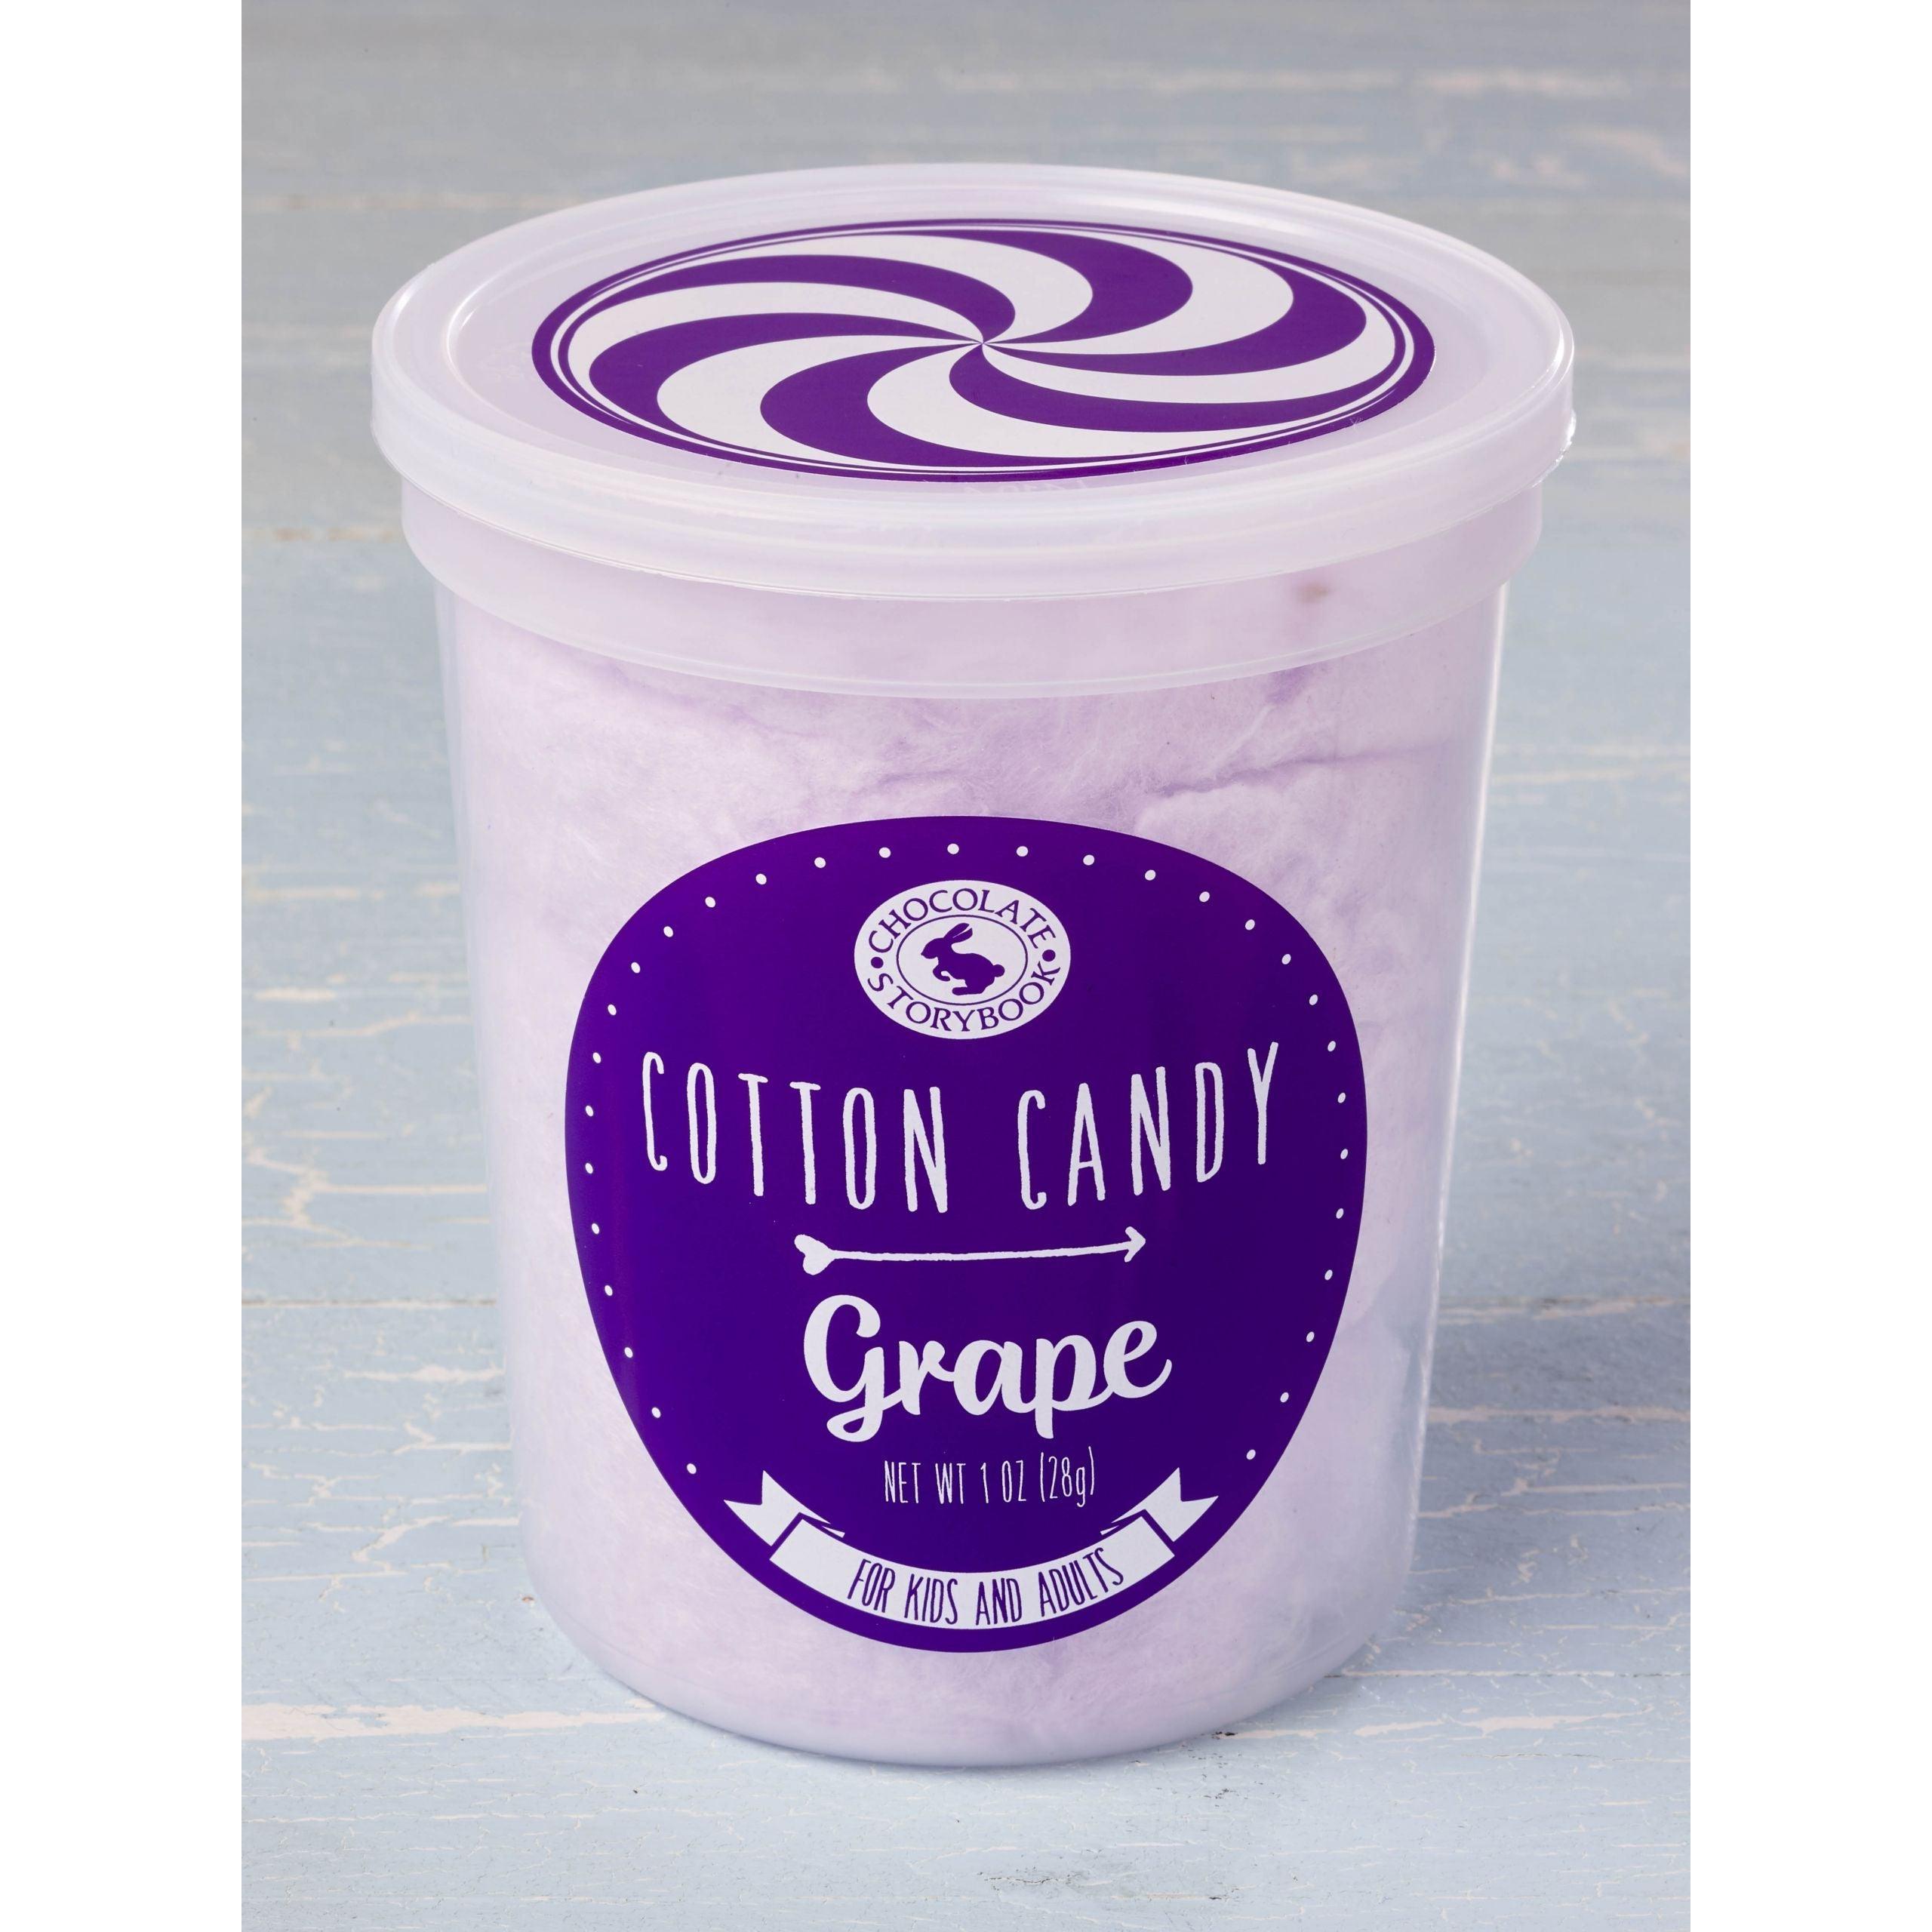 Chocolate Storybook-Grape Gourmet Cotton Candy-CSB-GR-Legacy Toys